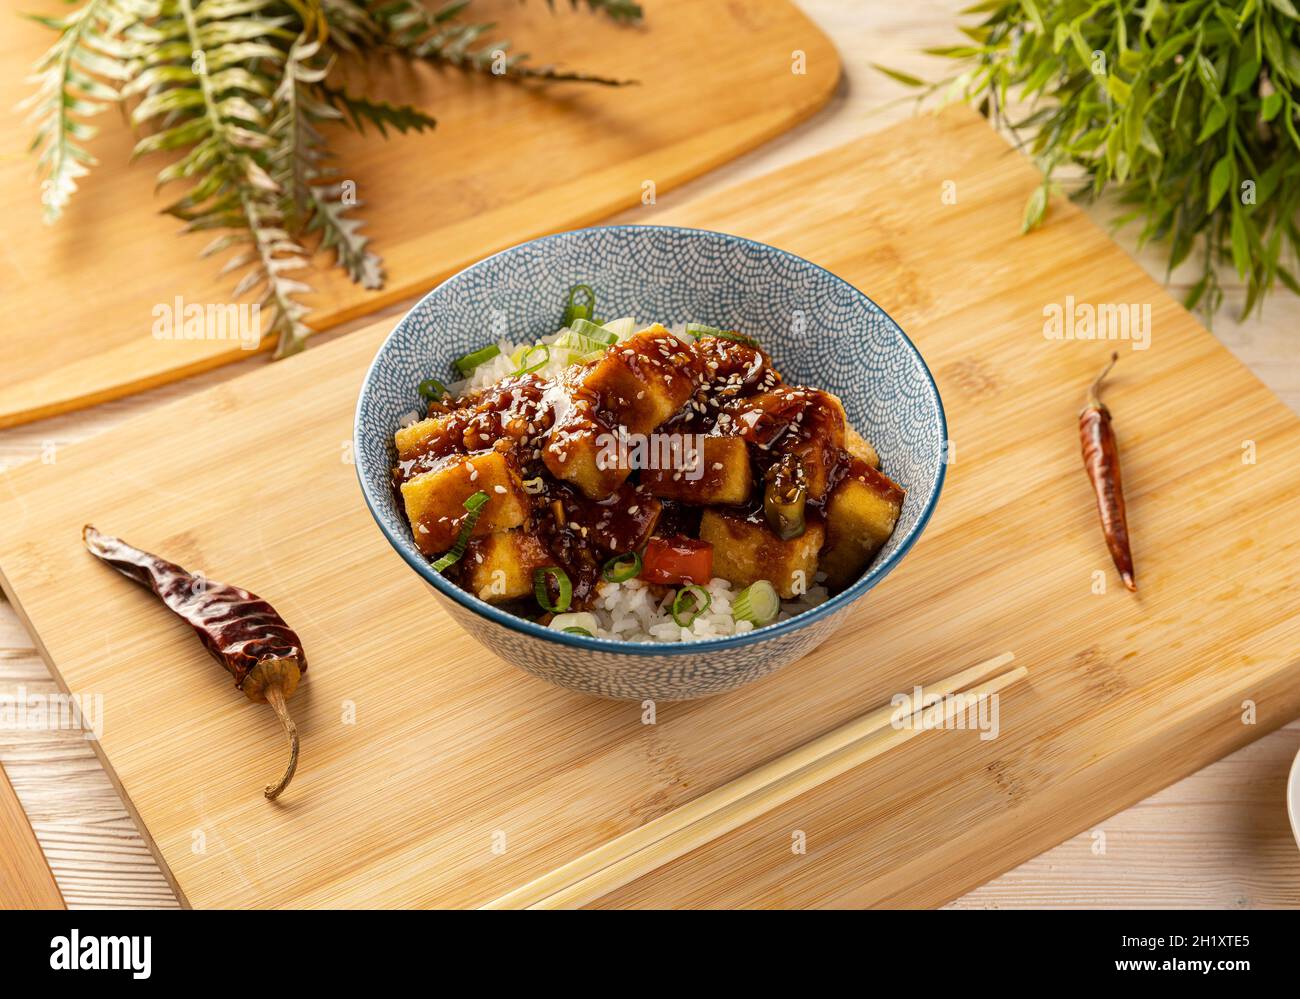 Stir fried tofu with spicy sauce served with rice Stock Photo